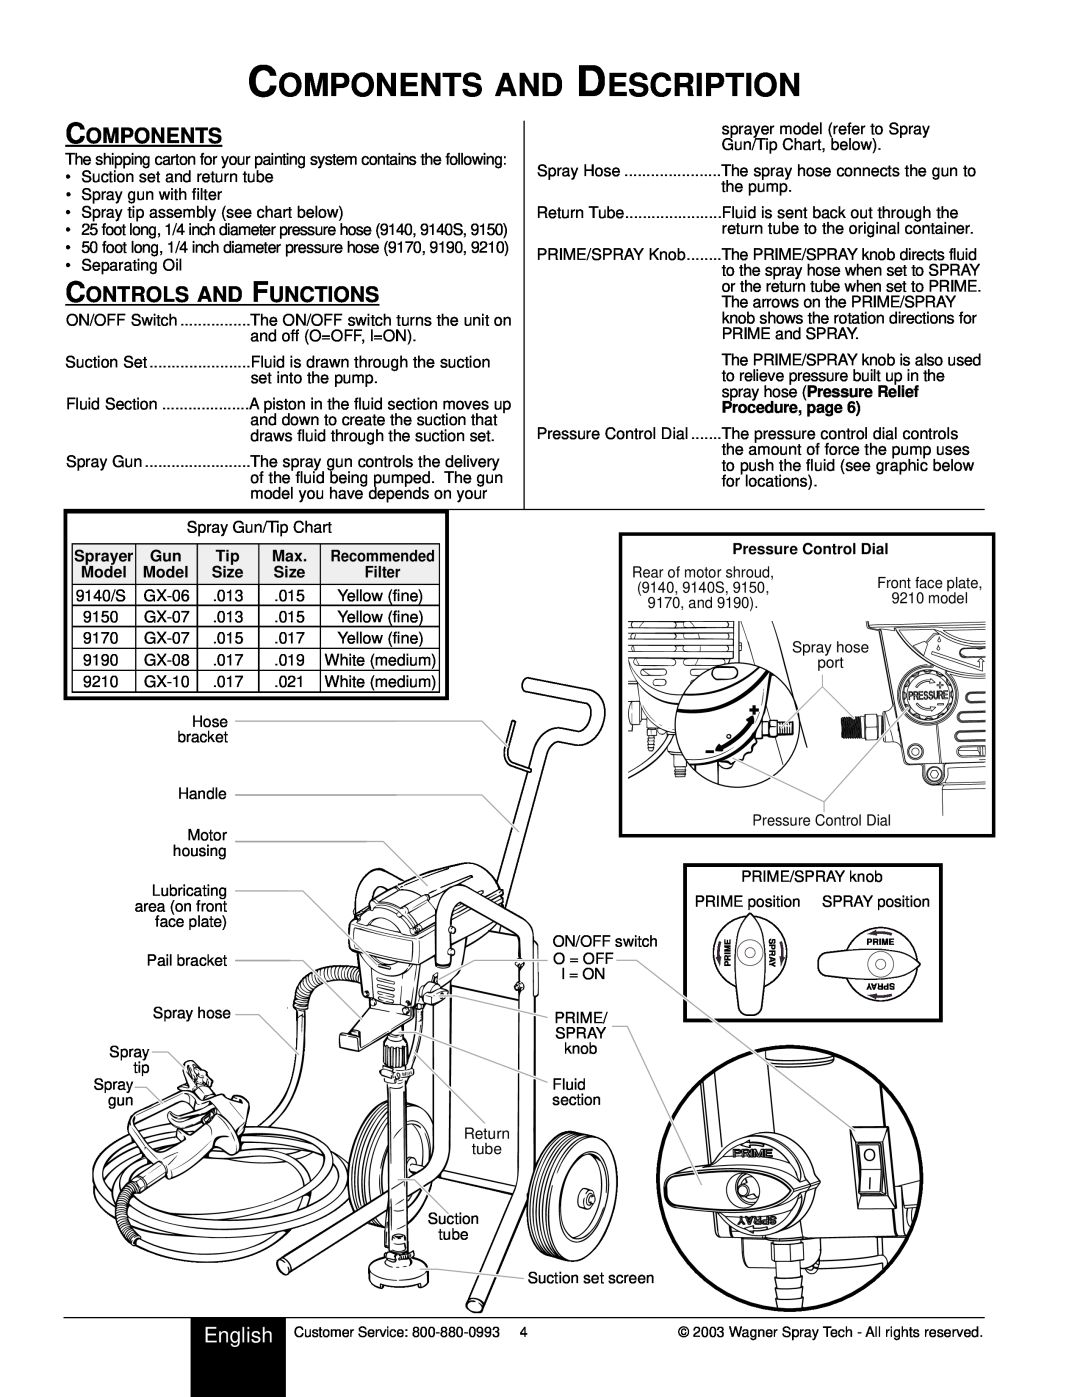 Wagner SprayTech 9140 Components And Description, Controls And Functions, English, spray hose Pressure Relief, Sprayer 